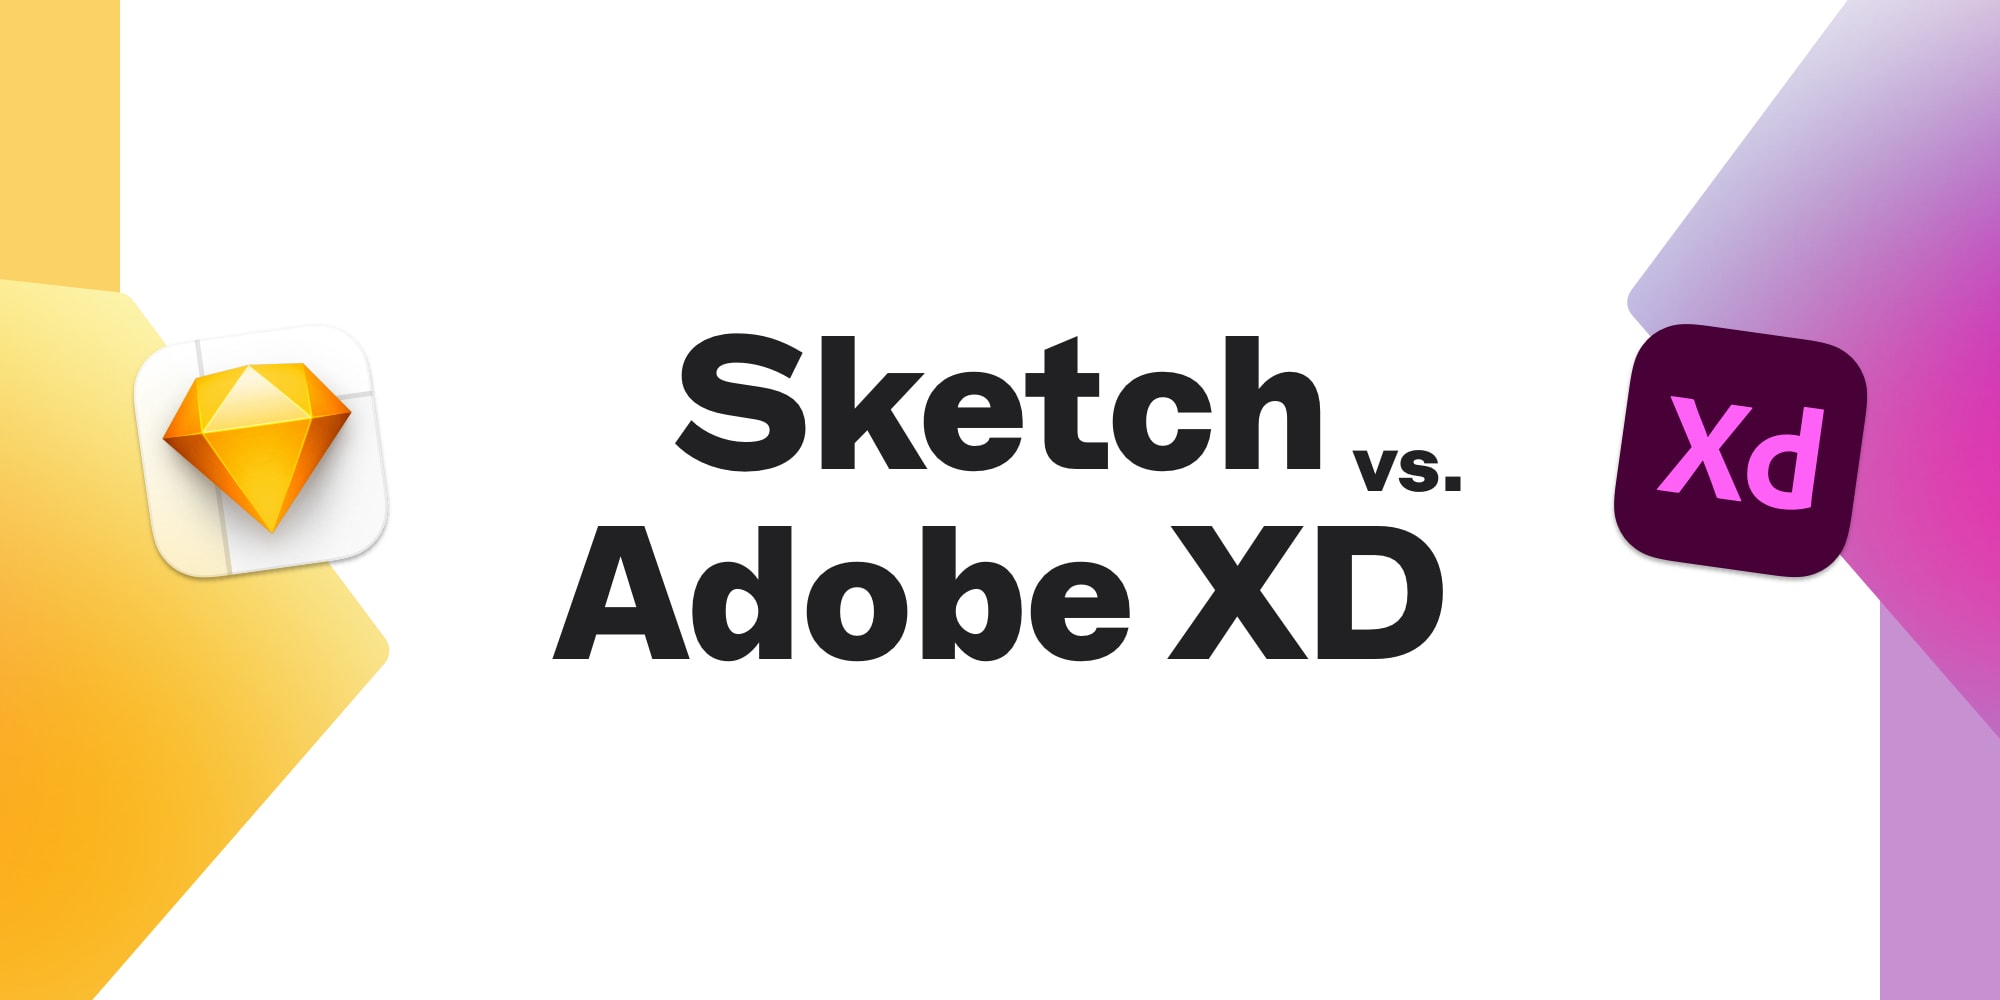 Convert psd to figma, psd to sketch, xd to sketch by Asolliss | Fiverr